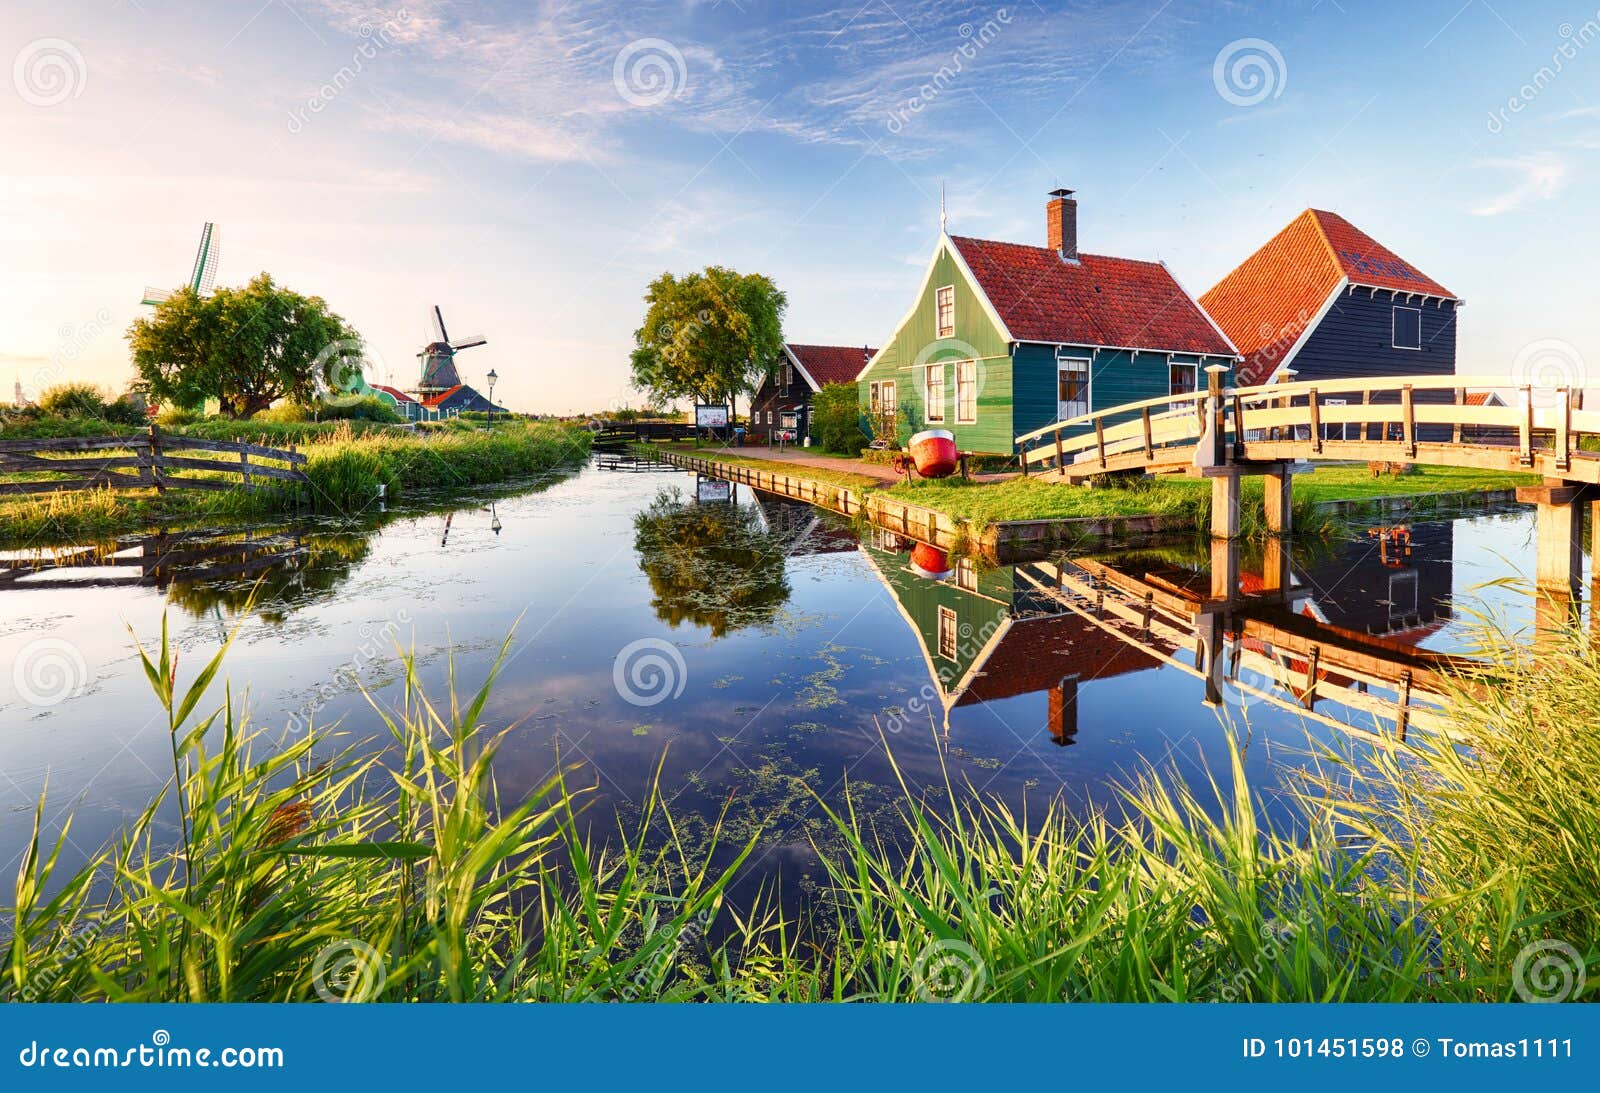 traditional dutch windmill near the canal. netherlands, landcape at sunset